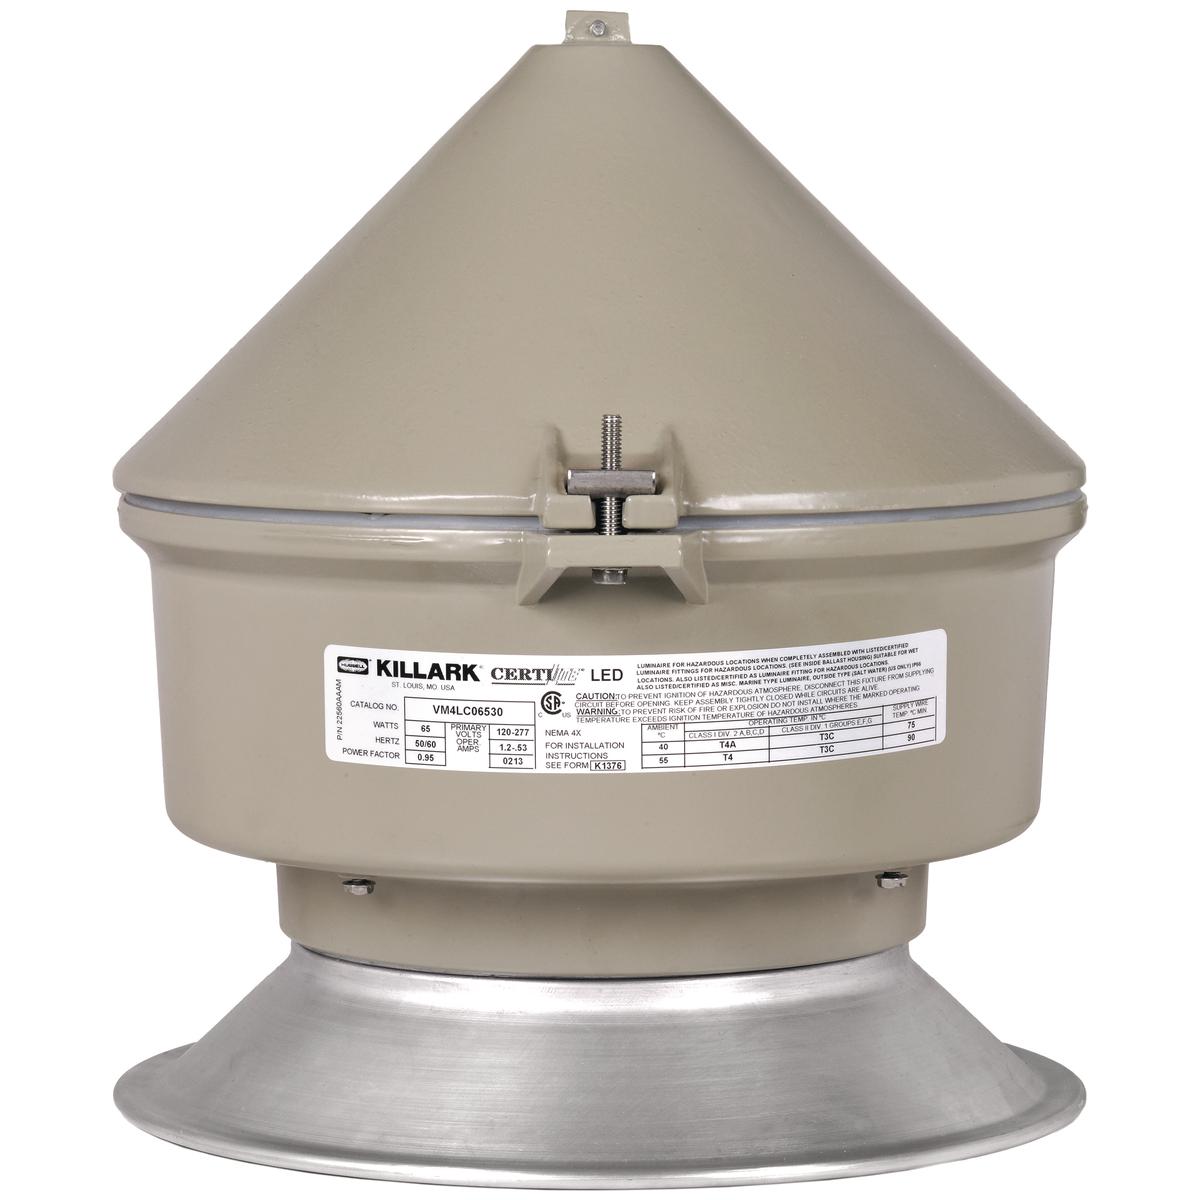 Hubbell VM4LC730C3GFG VM4LC 120-277V 1" Cone Top Mount Flat Glass with Guard  ; Supplemental 20KA/10KV Surge Protection is standard for 120-277 VAC models & 10KA/10KV Surge Protection is standard for 347-480 VAC models. ; Traditional Industrial Appearance, Suitability, and Pho